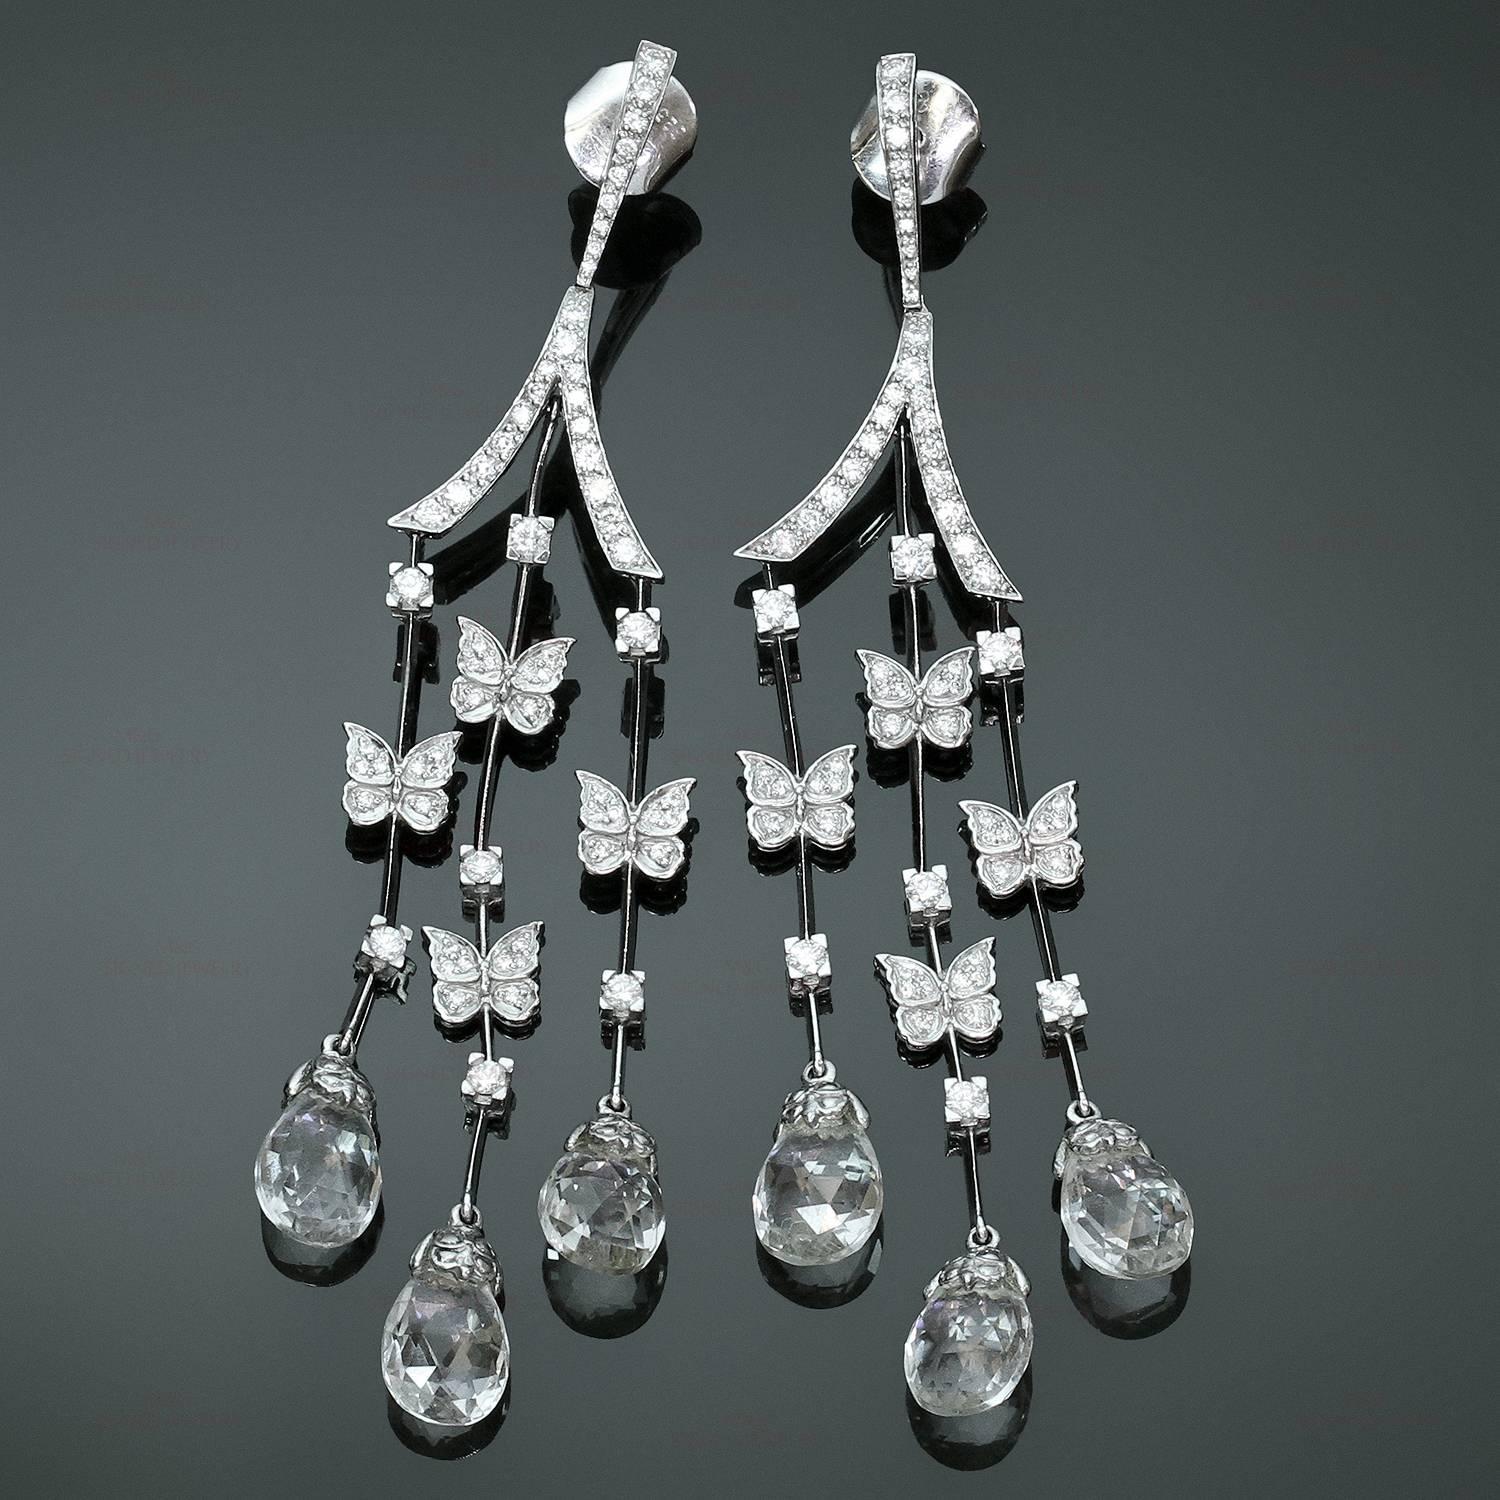 These exquisite dangling earrings from the Butterflies collection by Carrera Y Carerra are crafted in 18k white gold and feature delicate design set with 64 diamonds of an estimated 2.50 carats and completed with 6 faceted crystal briolettes. Made